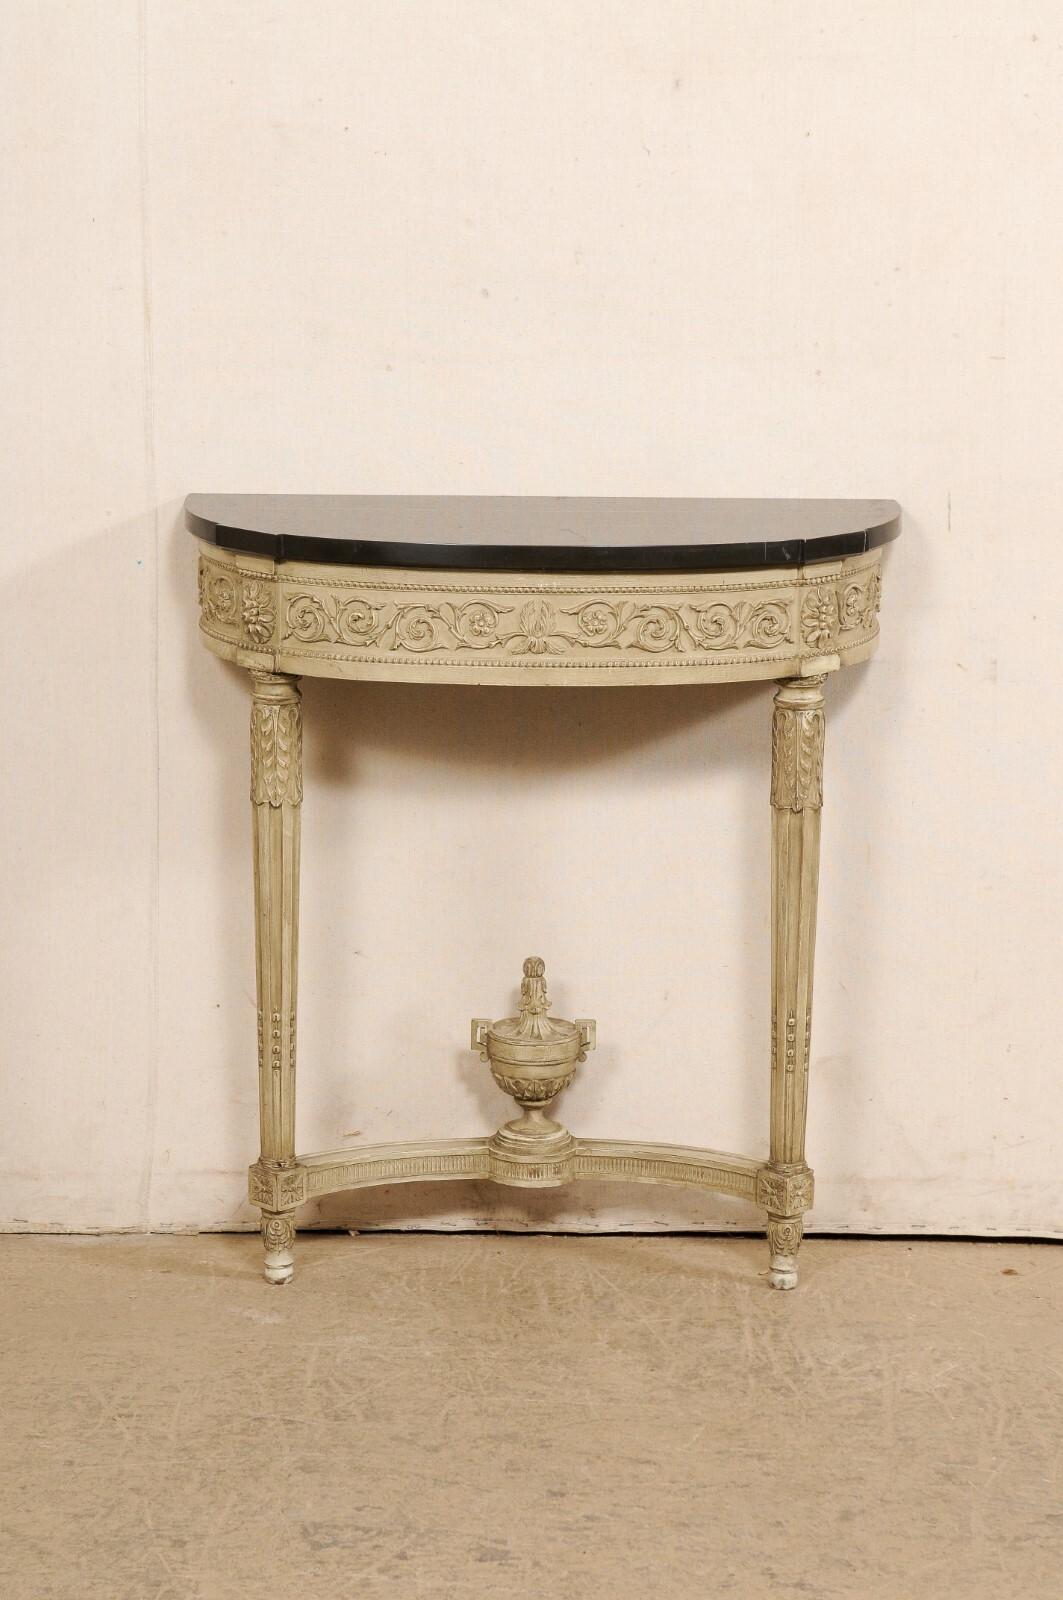 A French Neoclassic style console table, with marble top, from the early 20th century. This small-sized antique table from France features an oblong, demi-shaped marble top with blunt/canted projections at forward corners, which rests atop an apron